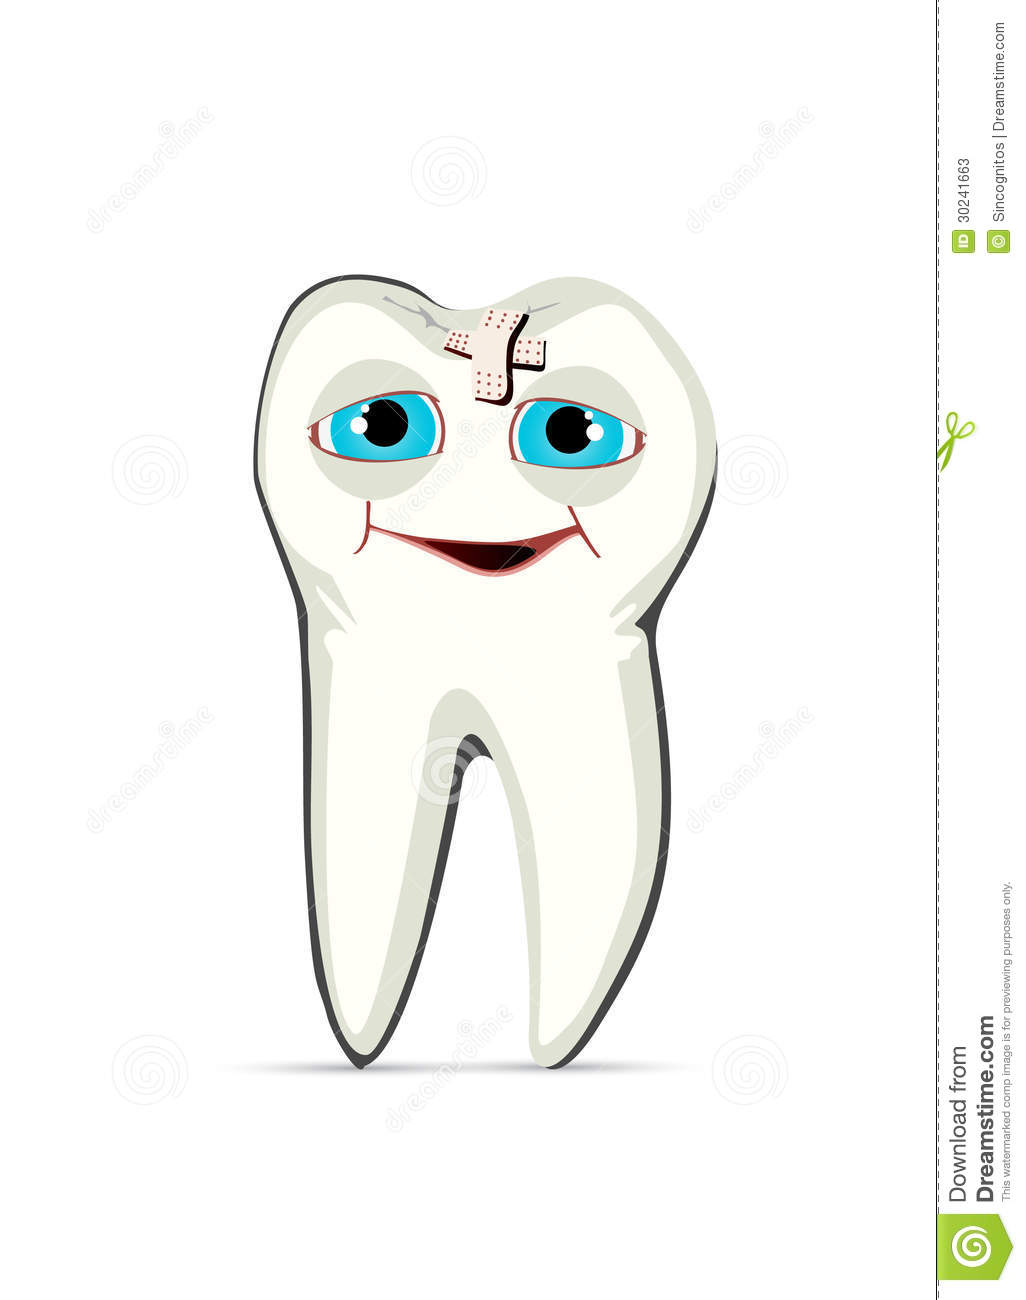 Humanized Healed Tooth Smiling With Band Aid